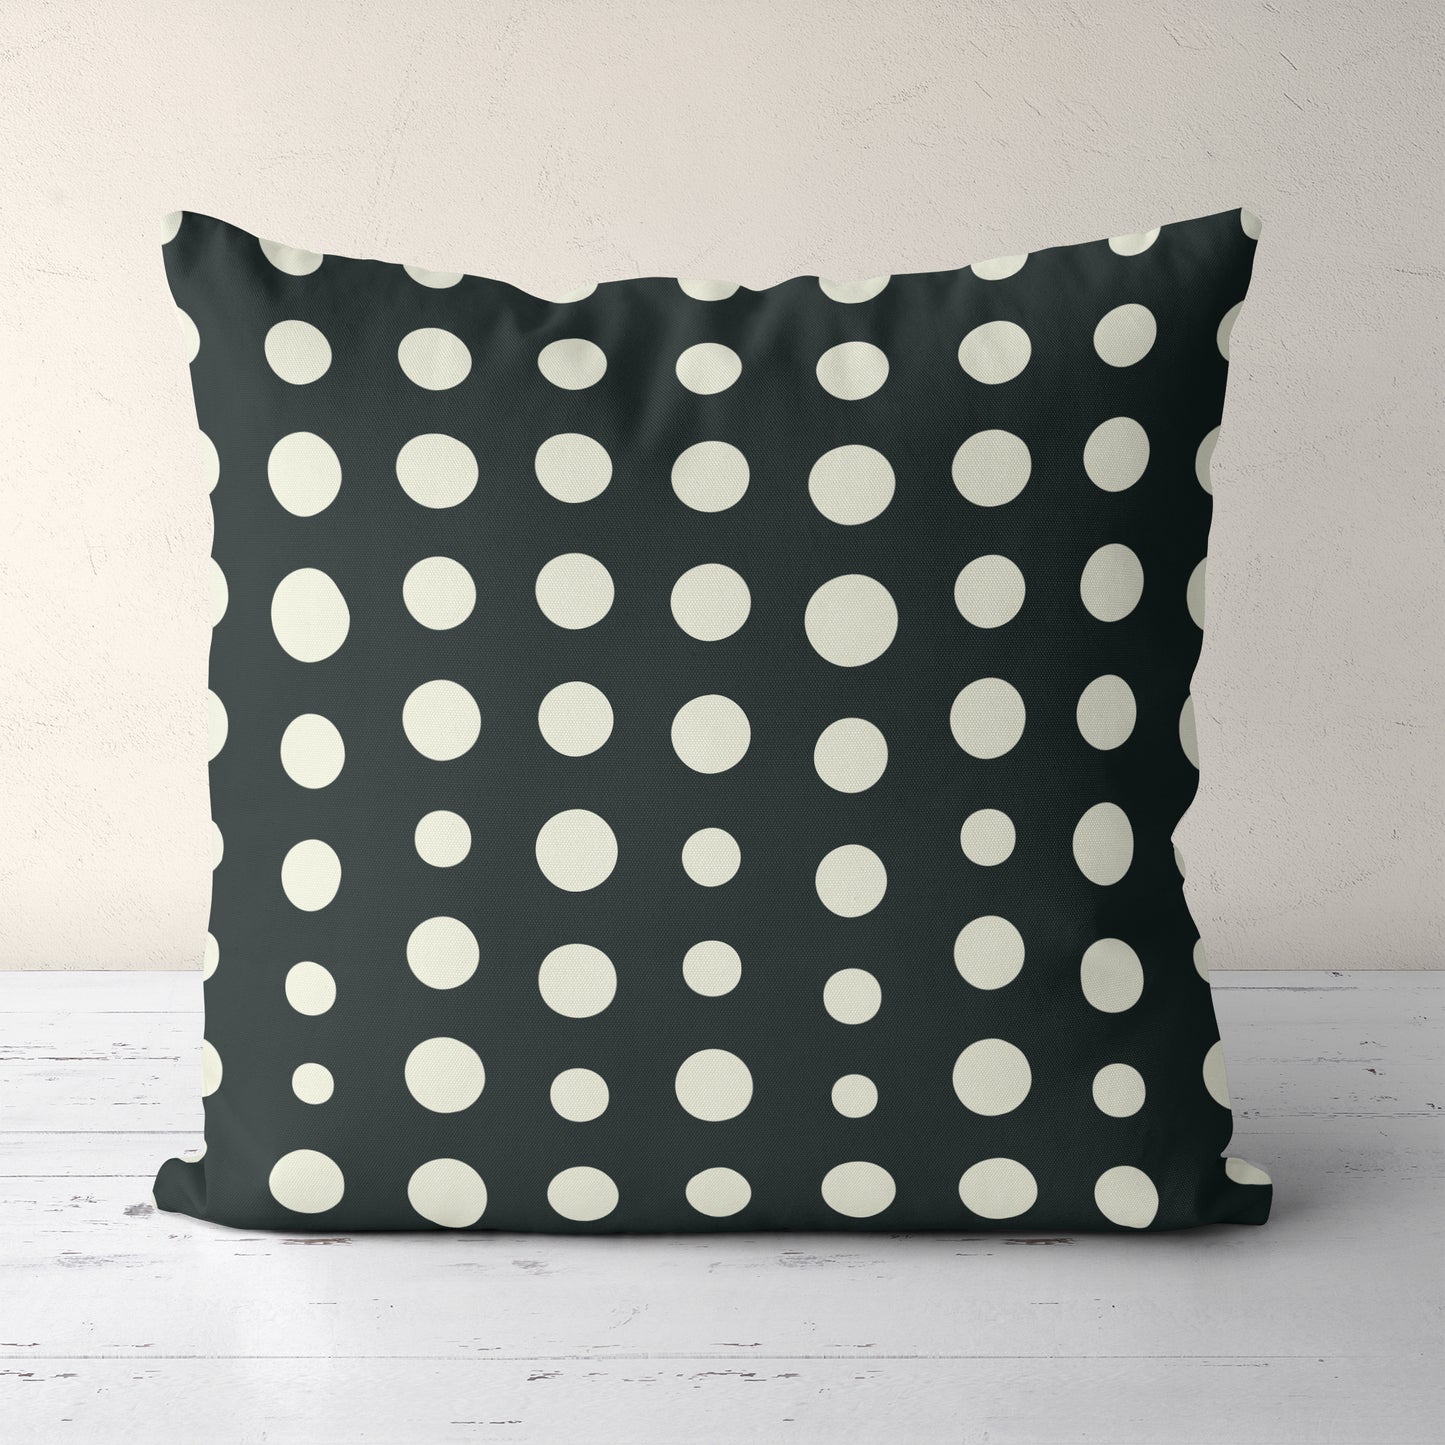 Pillow with Retro Dots v4